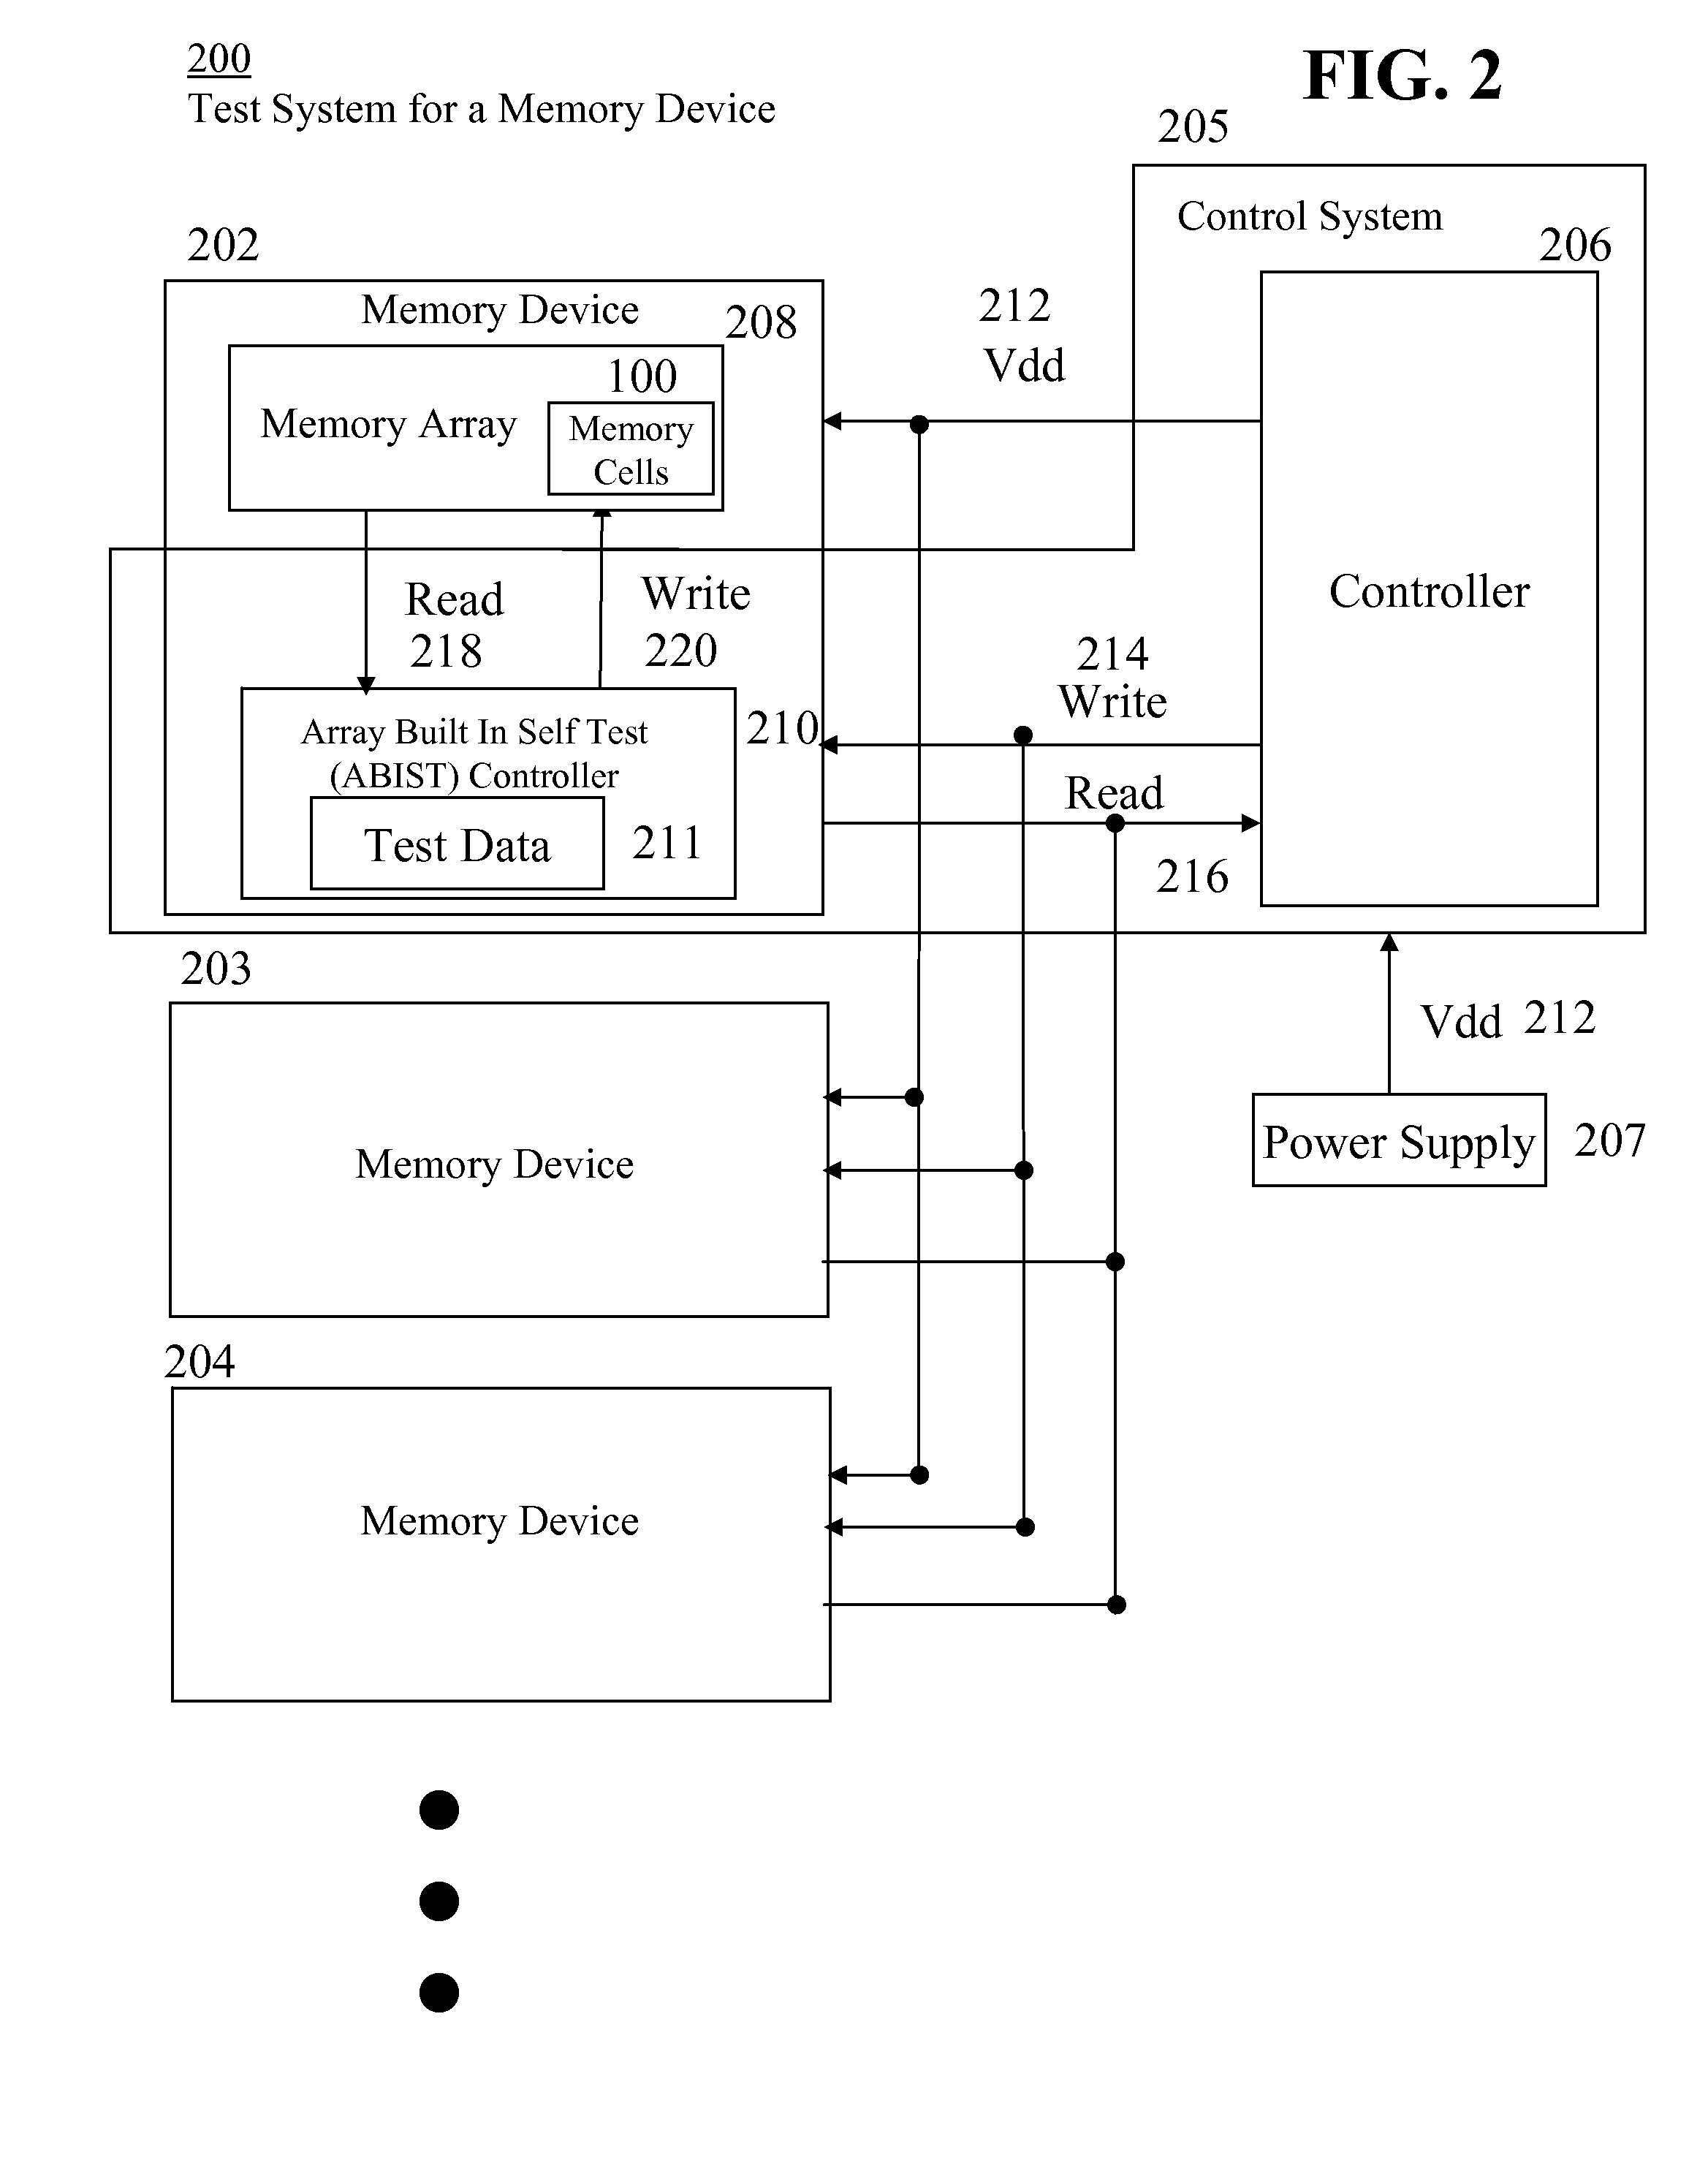 Testing a memory device having field effect transistors subject to threshold voltage shifts caused by bias temperature instability